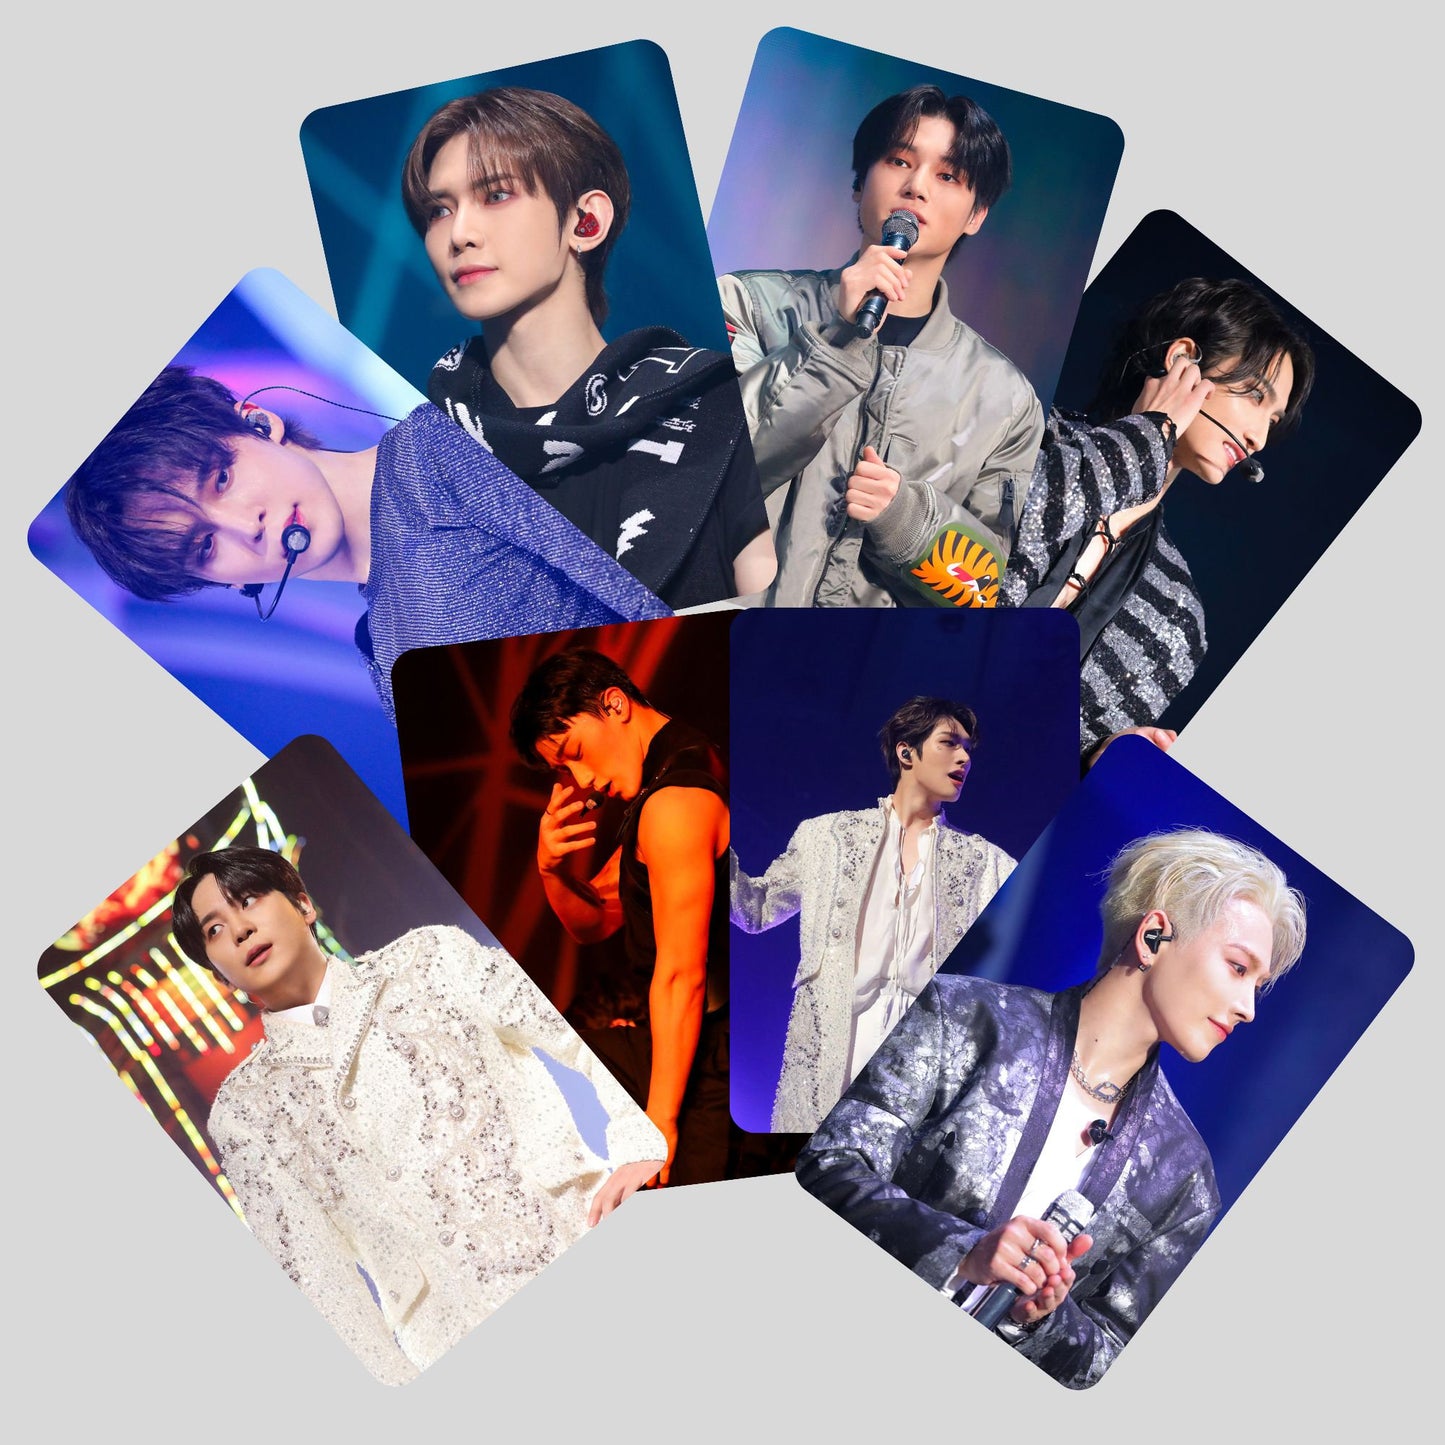 Ateez Towards The Light Will to Power Concert Photocards